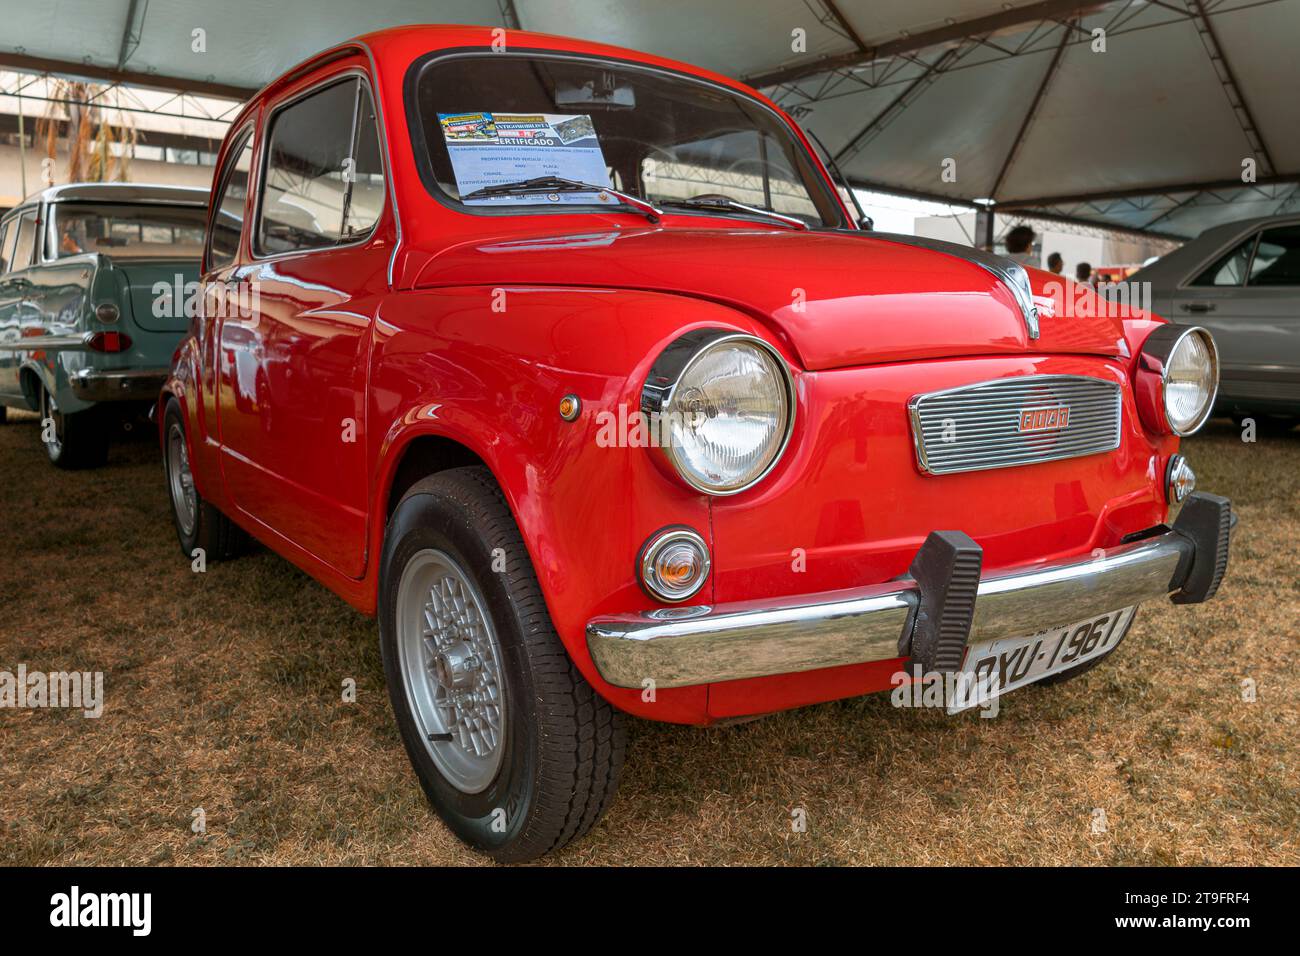 Vehicle Fiat 500 1972 on display at a vintage car fair show in the city of Londrina, Brazil. Annual vintage car meeting. Stock Photo